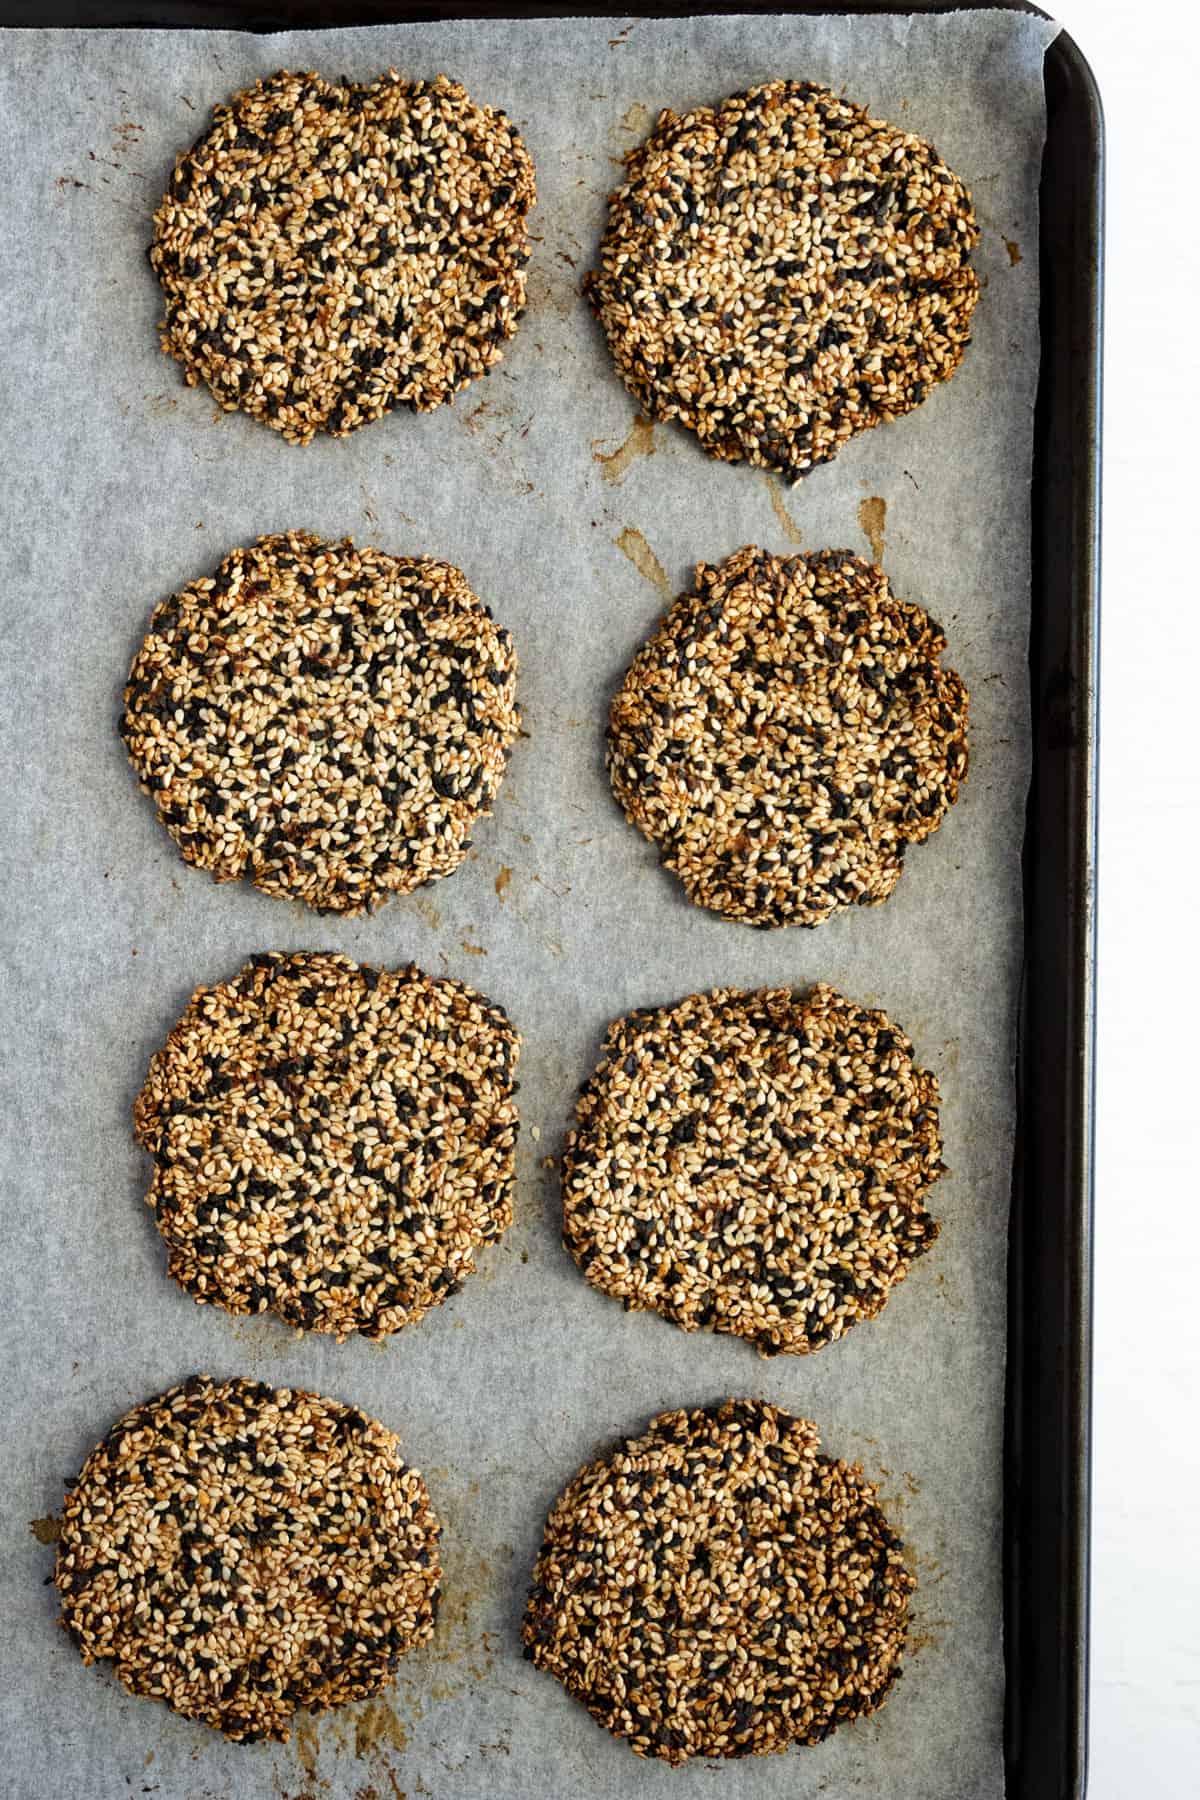 8 golden brown sesame seed cookies on a baking tray